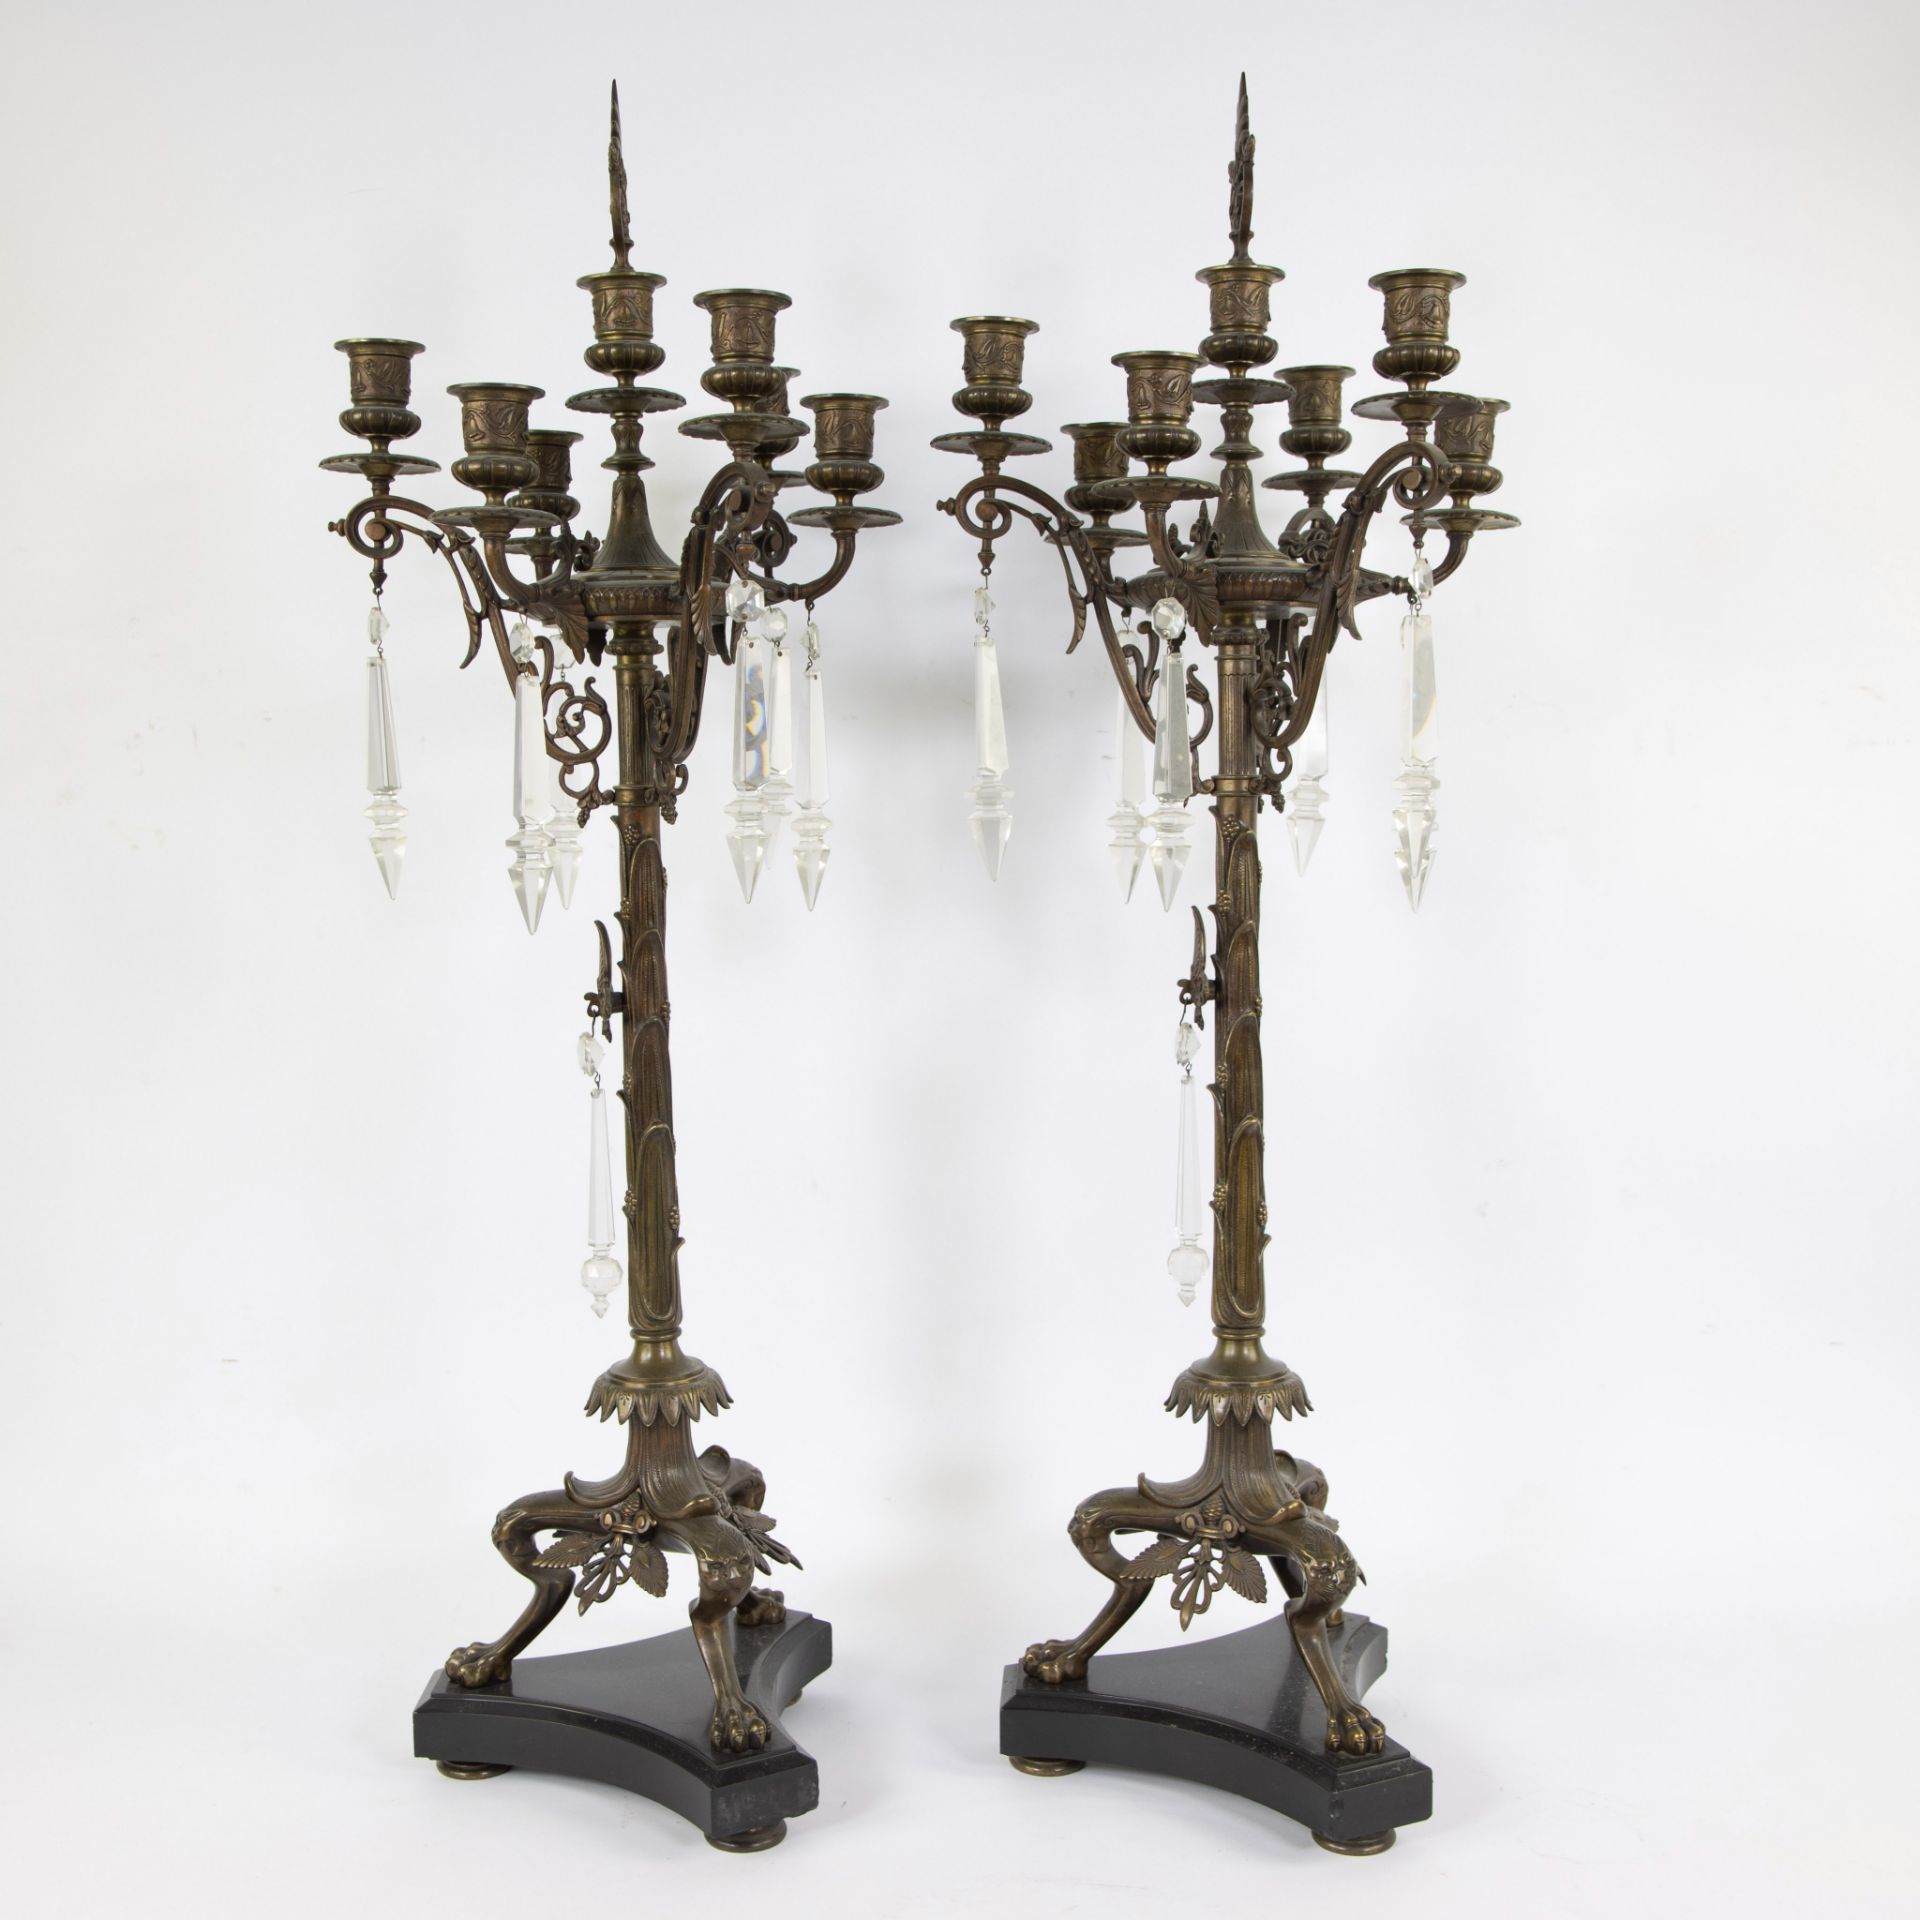 Two large rare solid bronze 19th century candlesticks with 7 light points, standing on claw feet and - Image 3 of 5